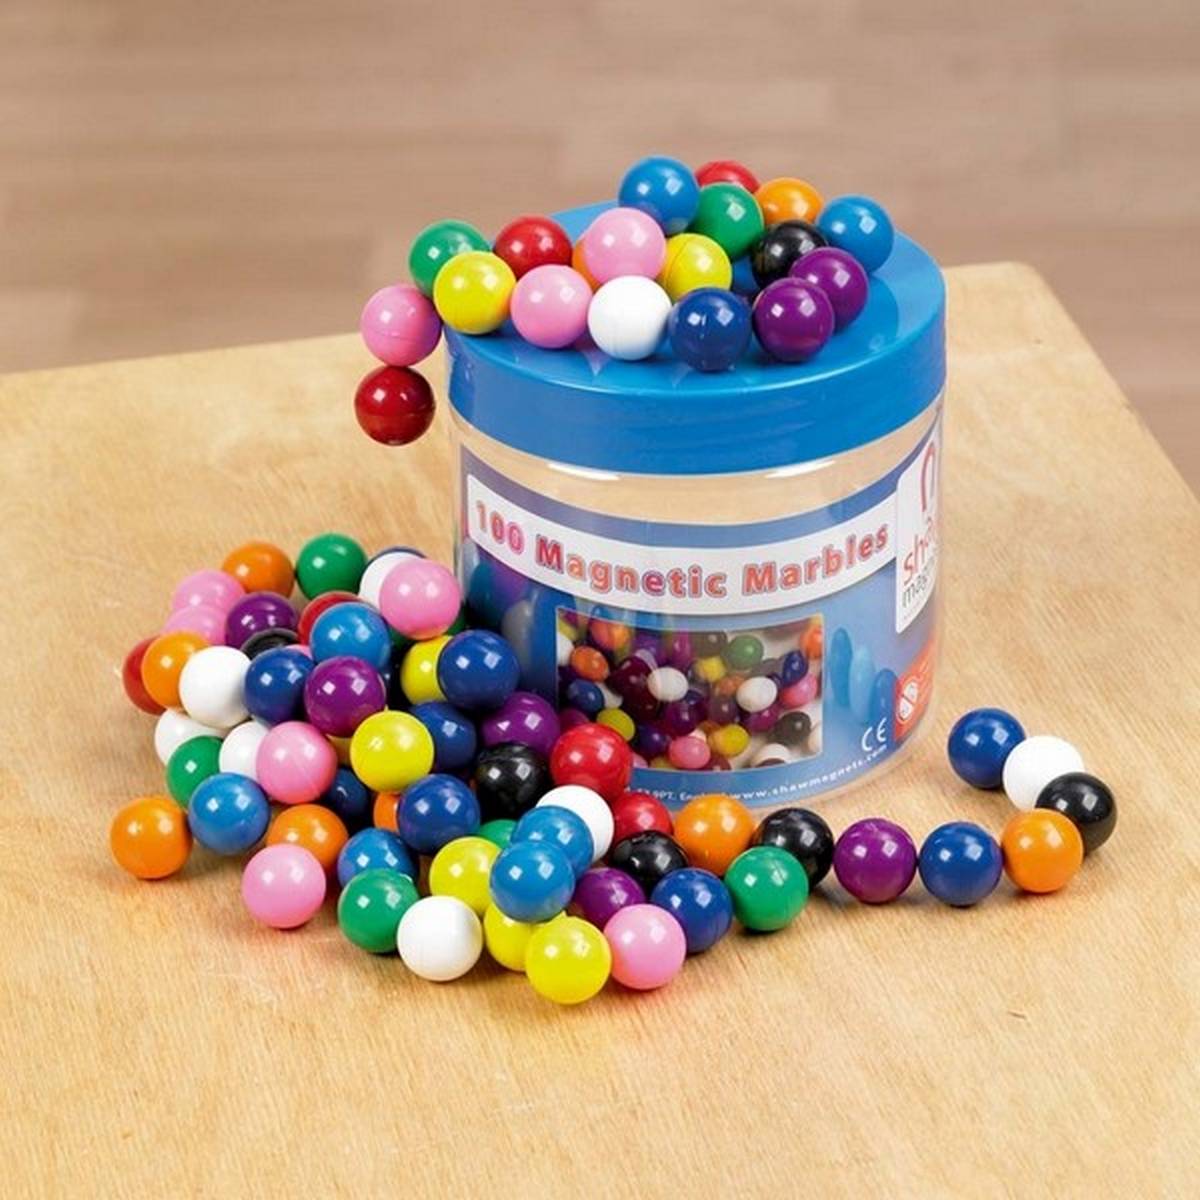 Magnetic Marbles Tub - Pack of 100